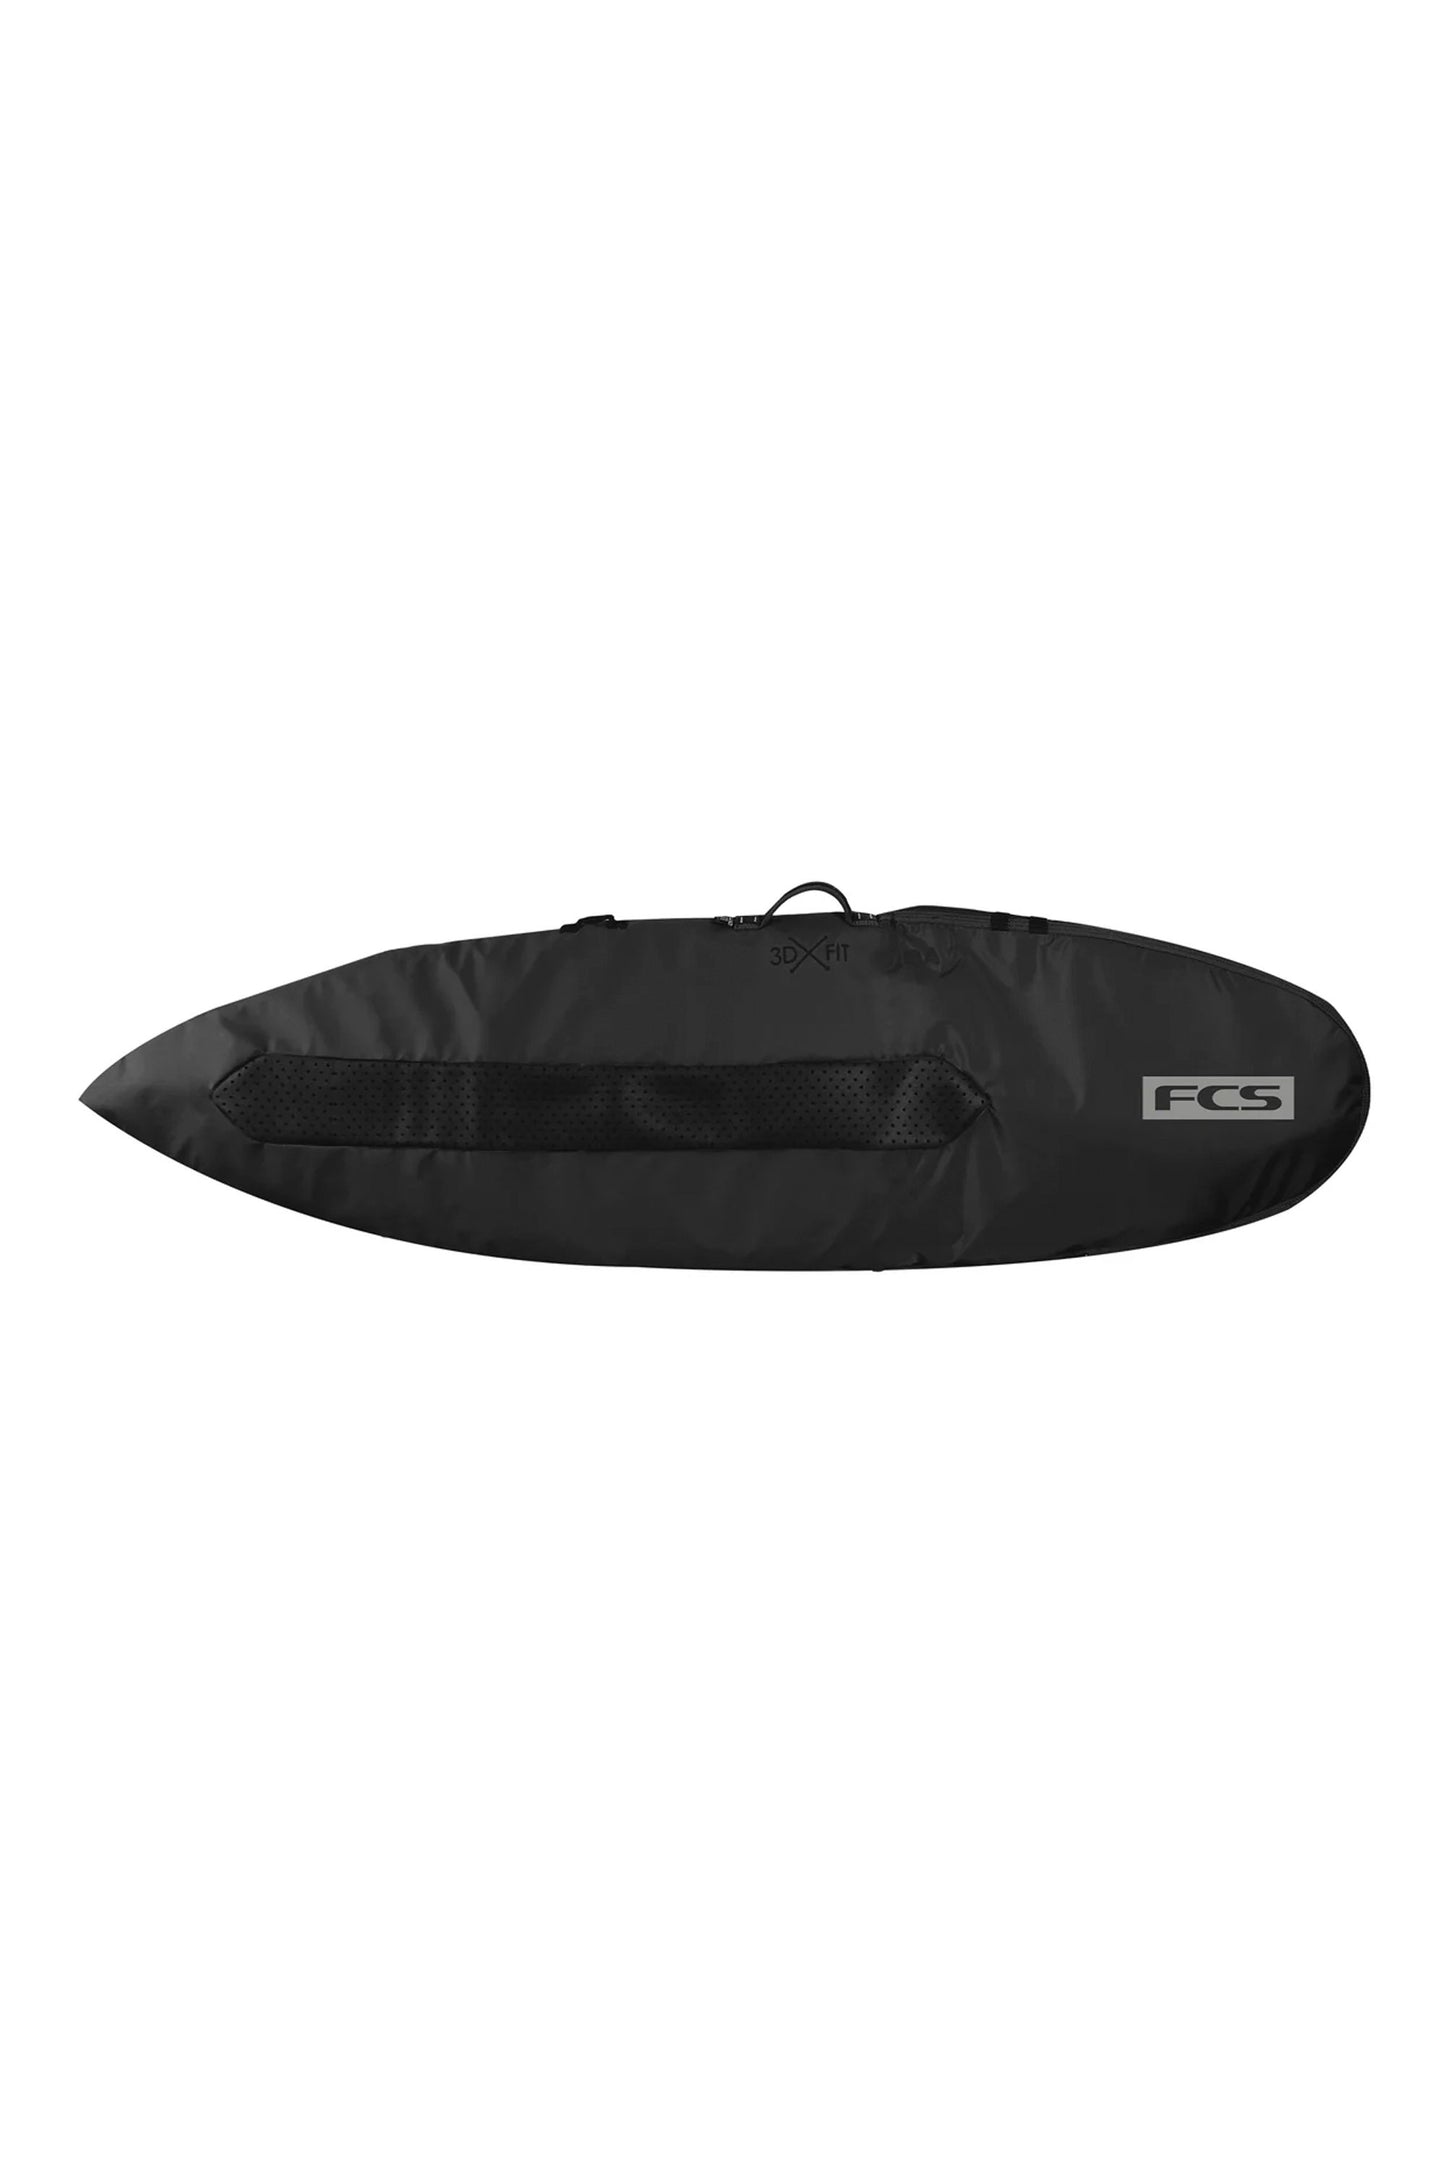 Pukas-Surf-Shop-fcs-day-all-purpose-cover-black-warm-grey